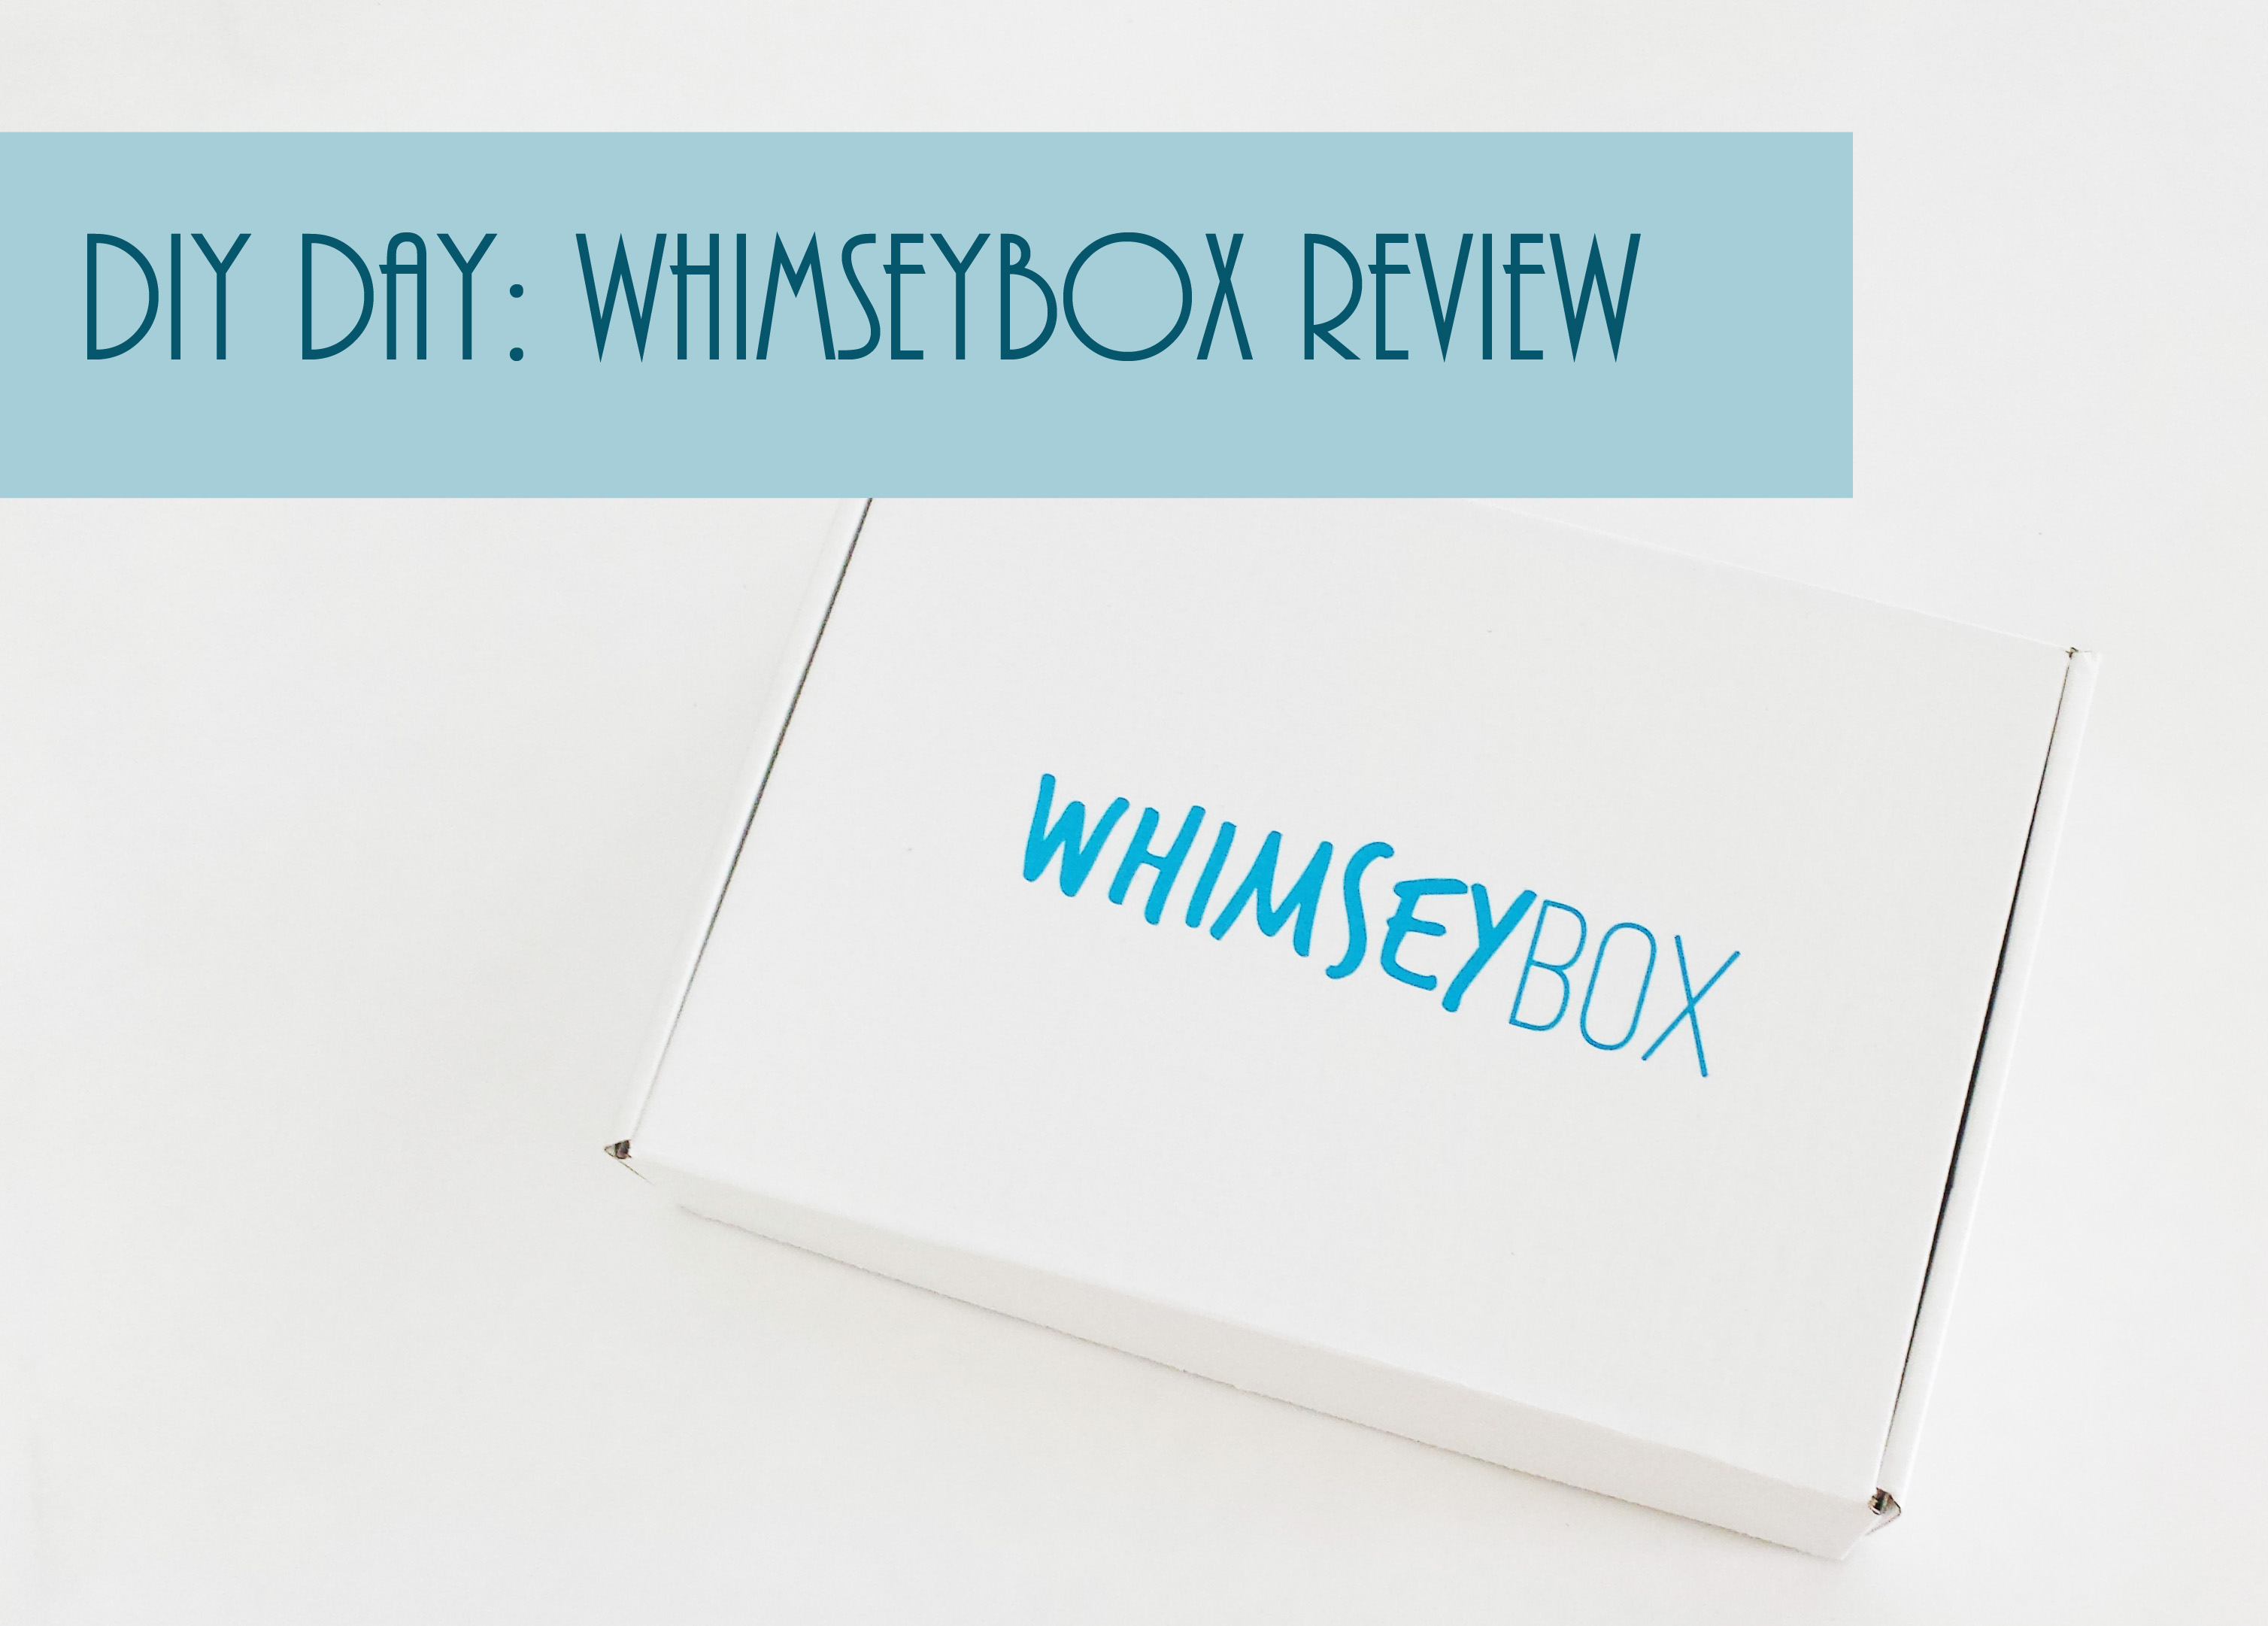 FINDS - DIY DAY - Whimseybox Review